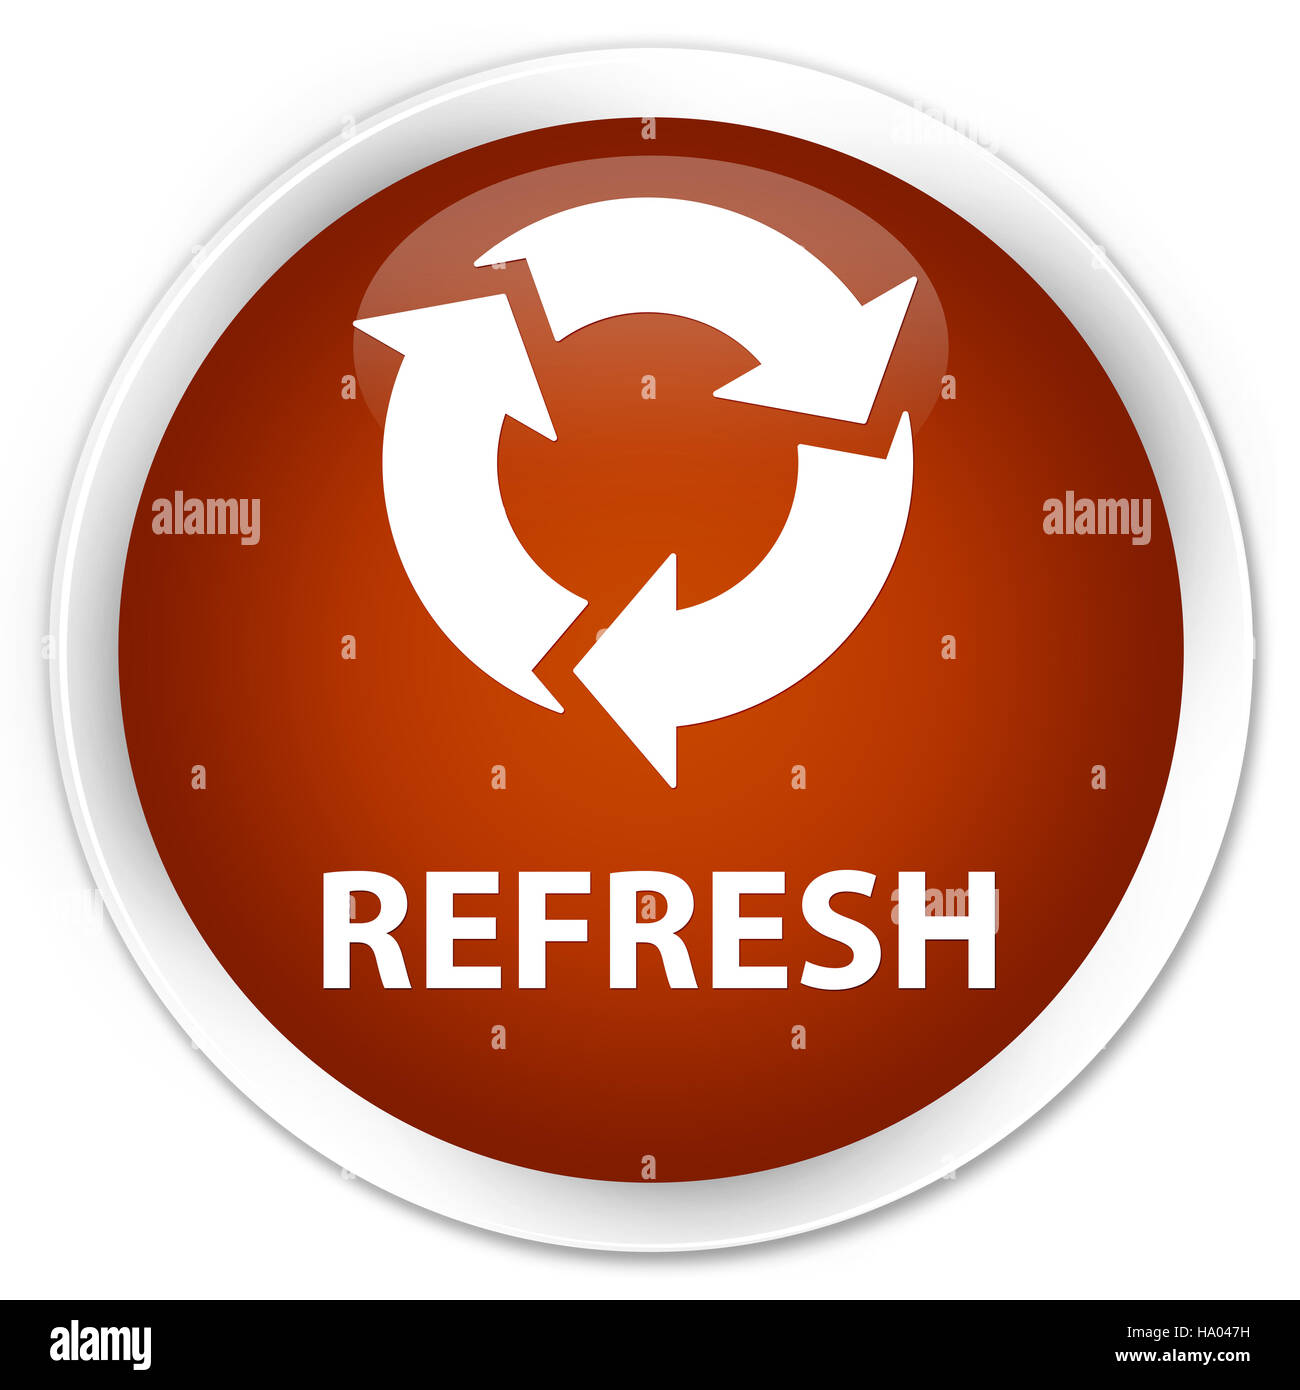 Refresh isolated on premium brown round button abstract illustration Stock Photo